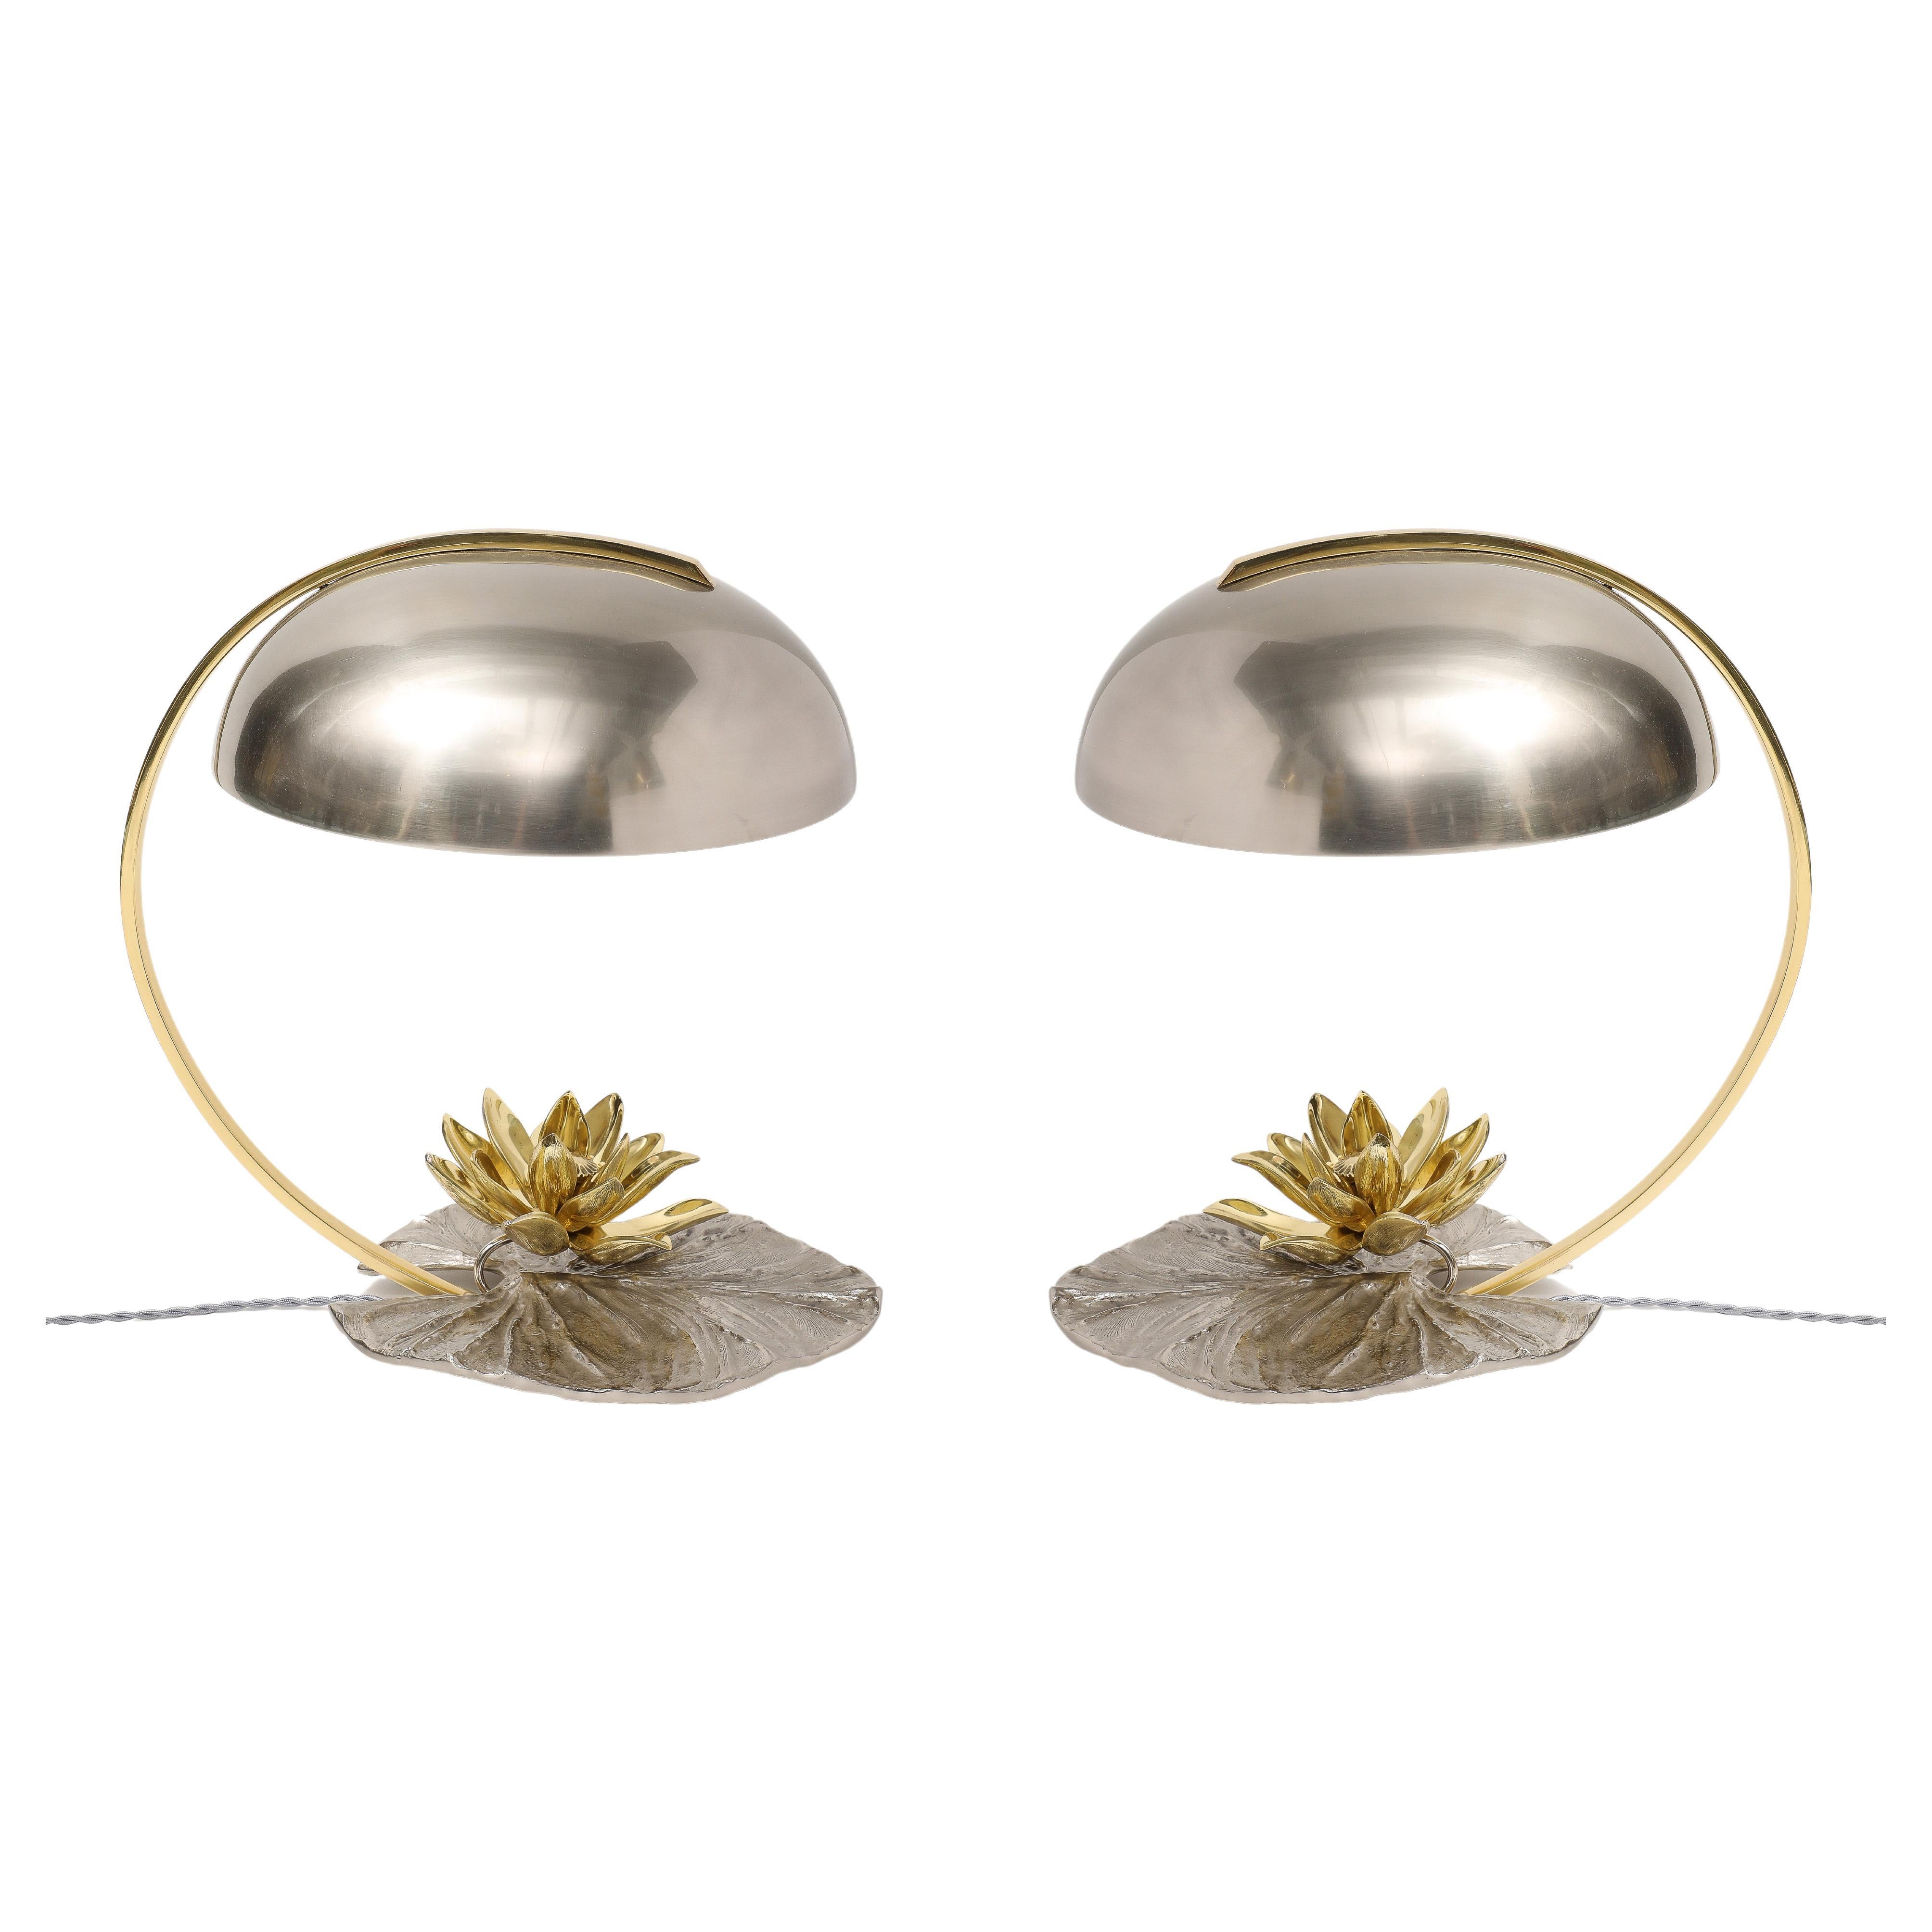 Spectacular Pair of Maison Charles Water Lily Lamps